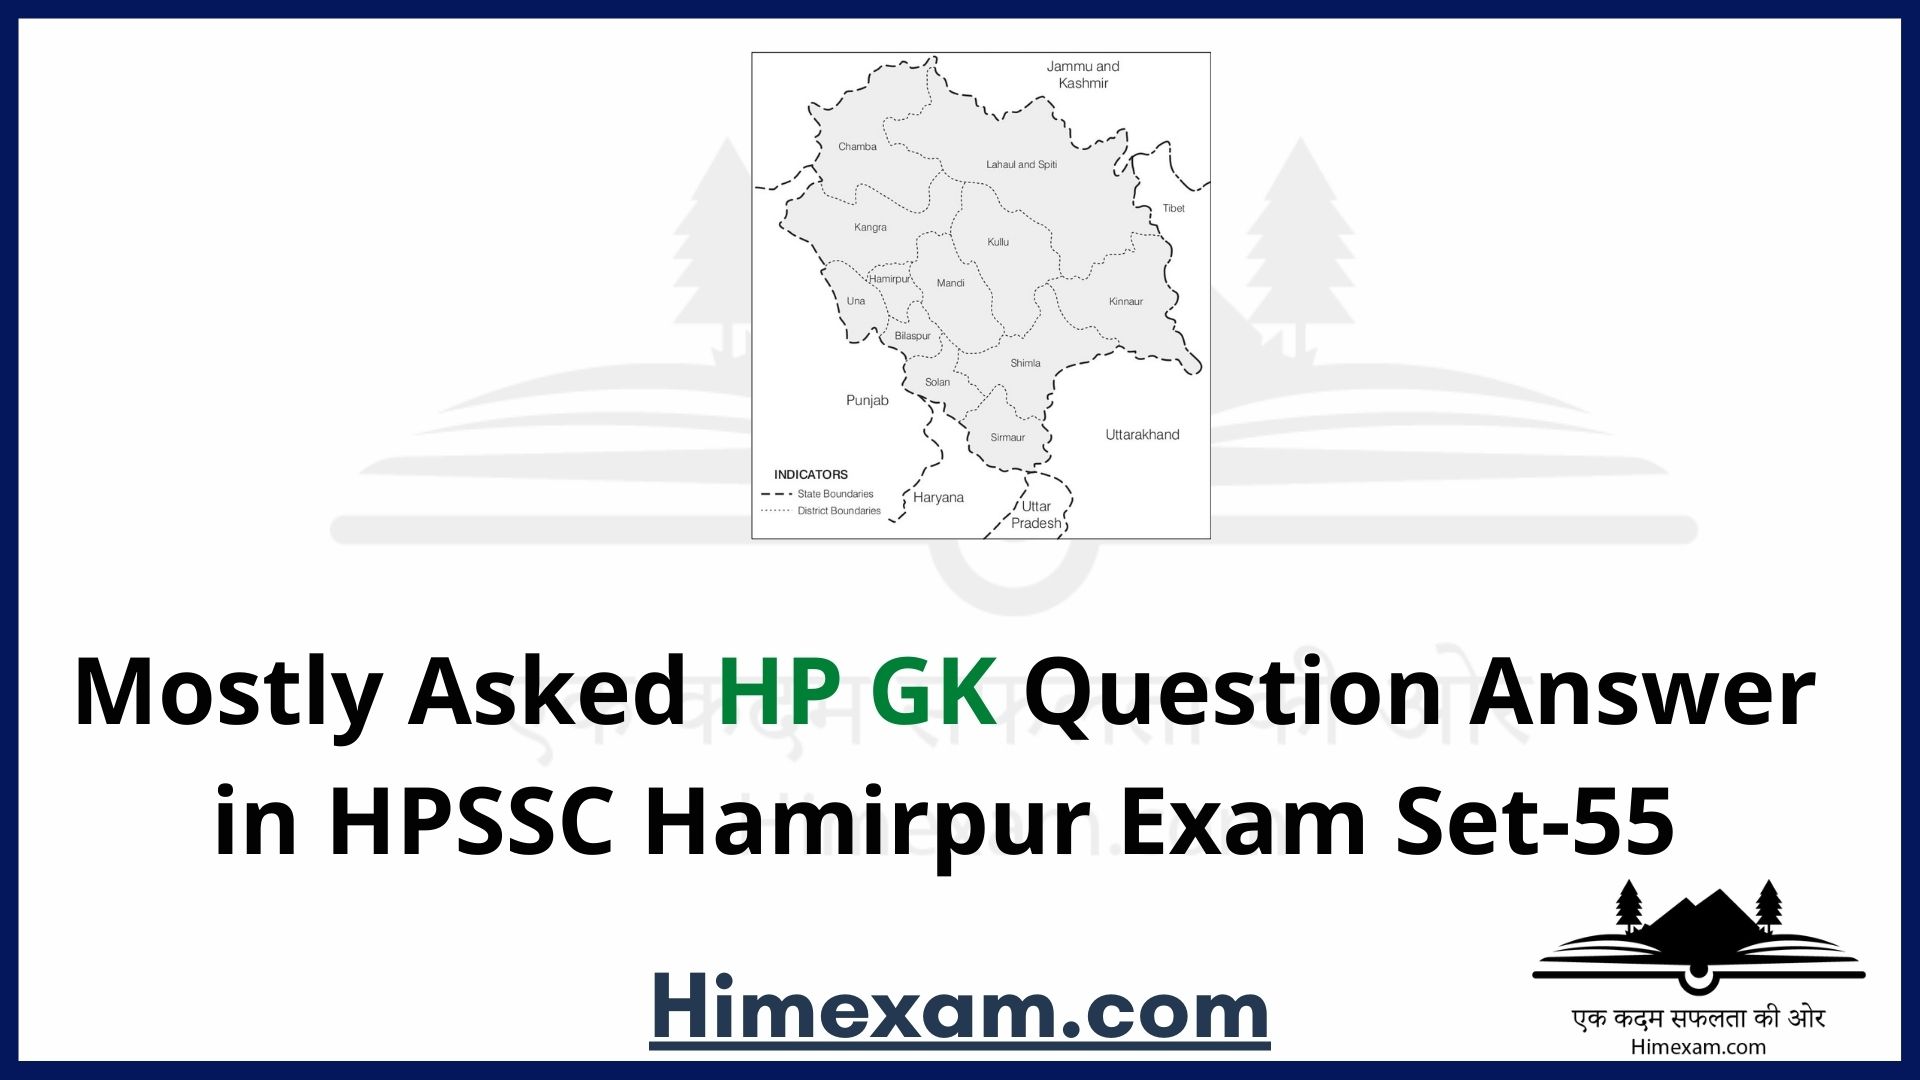 Mostly Asked HP GK Question Answer in HPSSC Hamirpur Exam Set-55